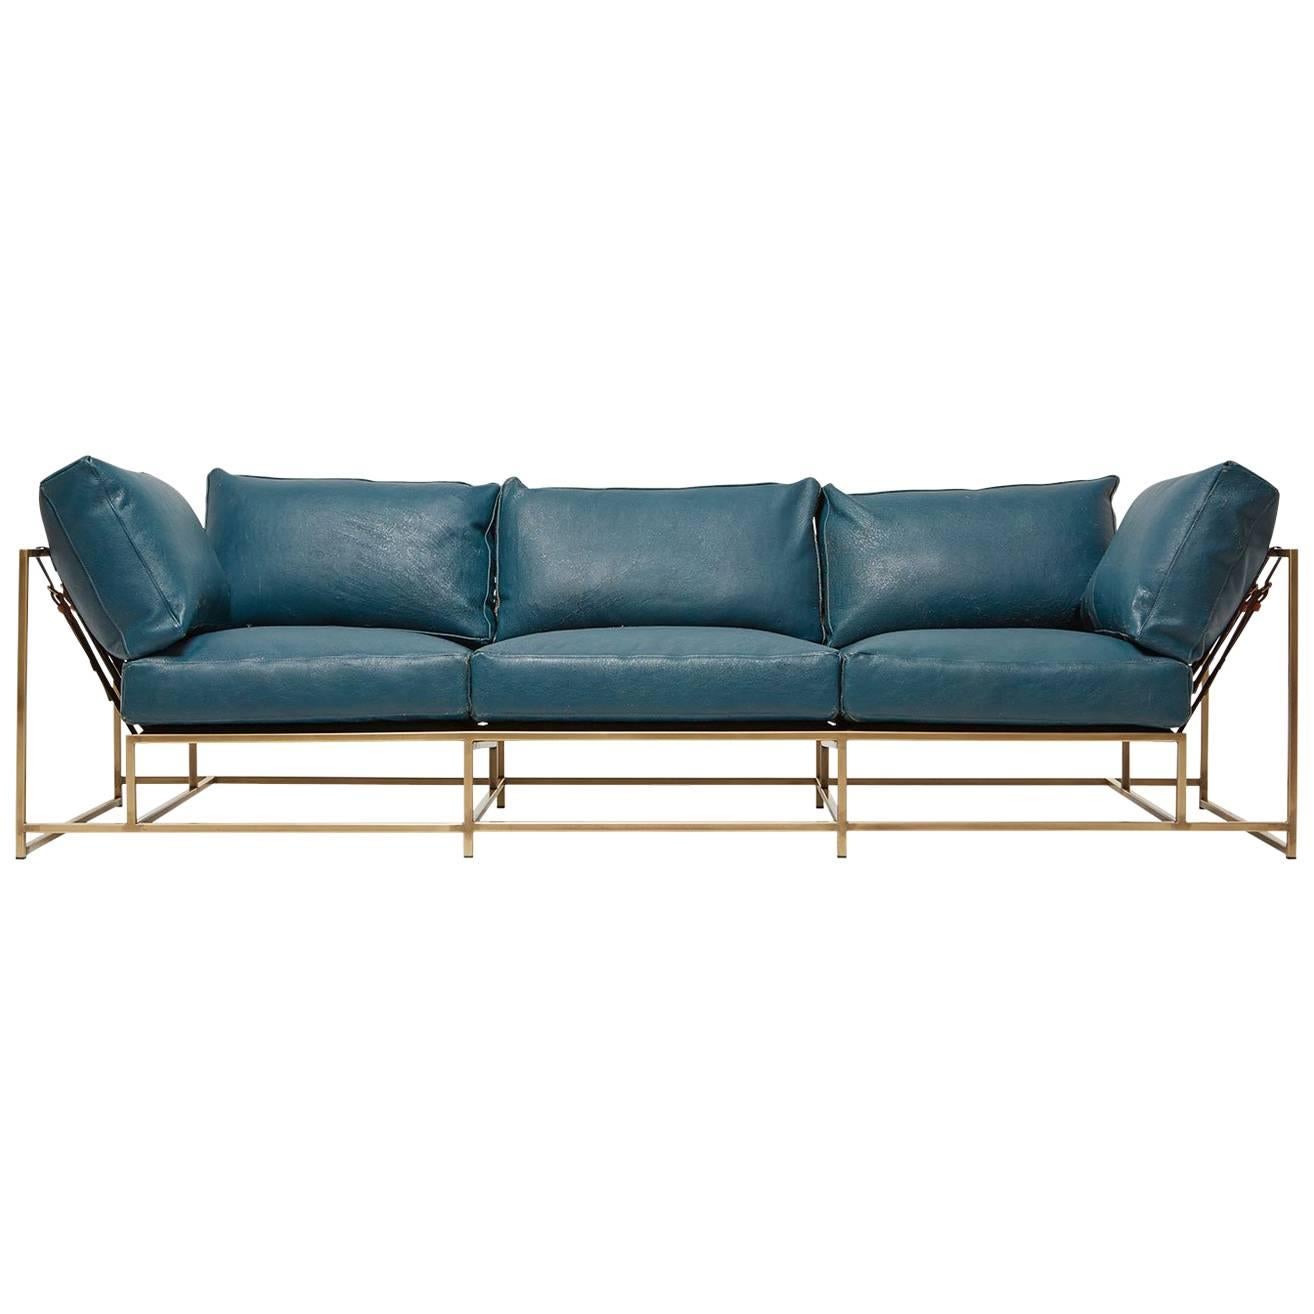 Teal Leather and Light Antique Brass Sofa